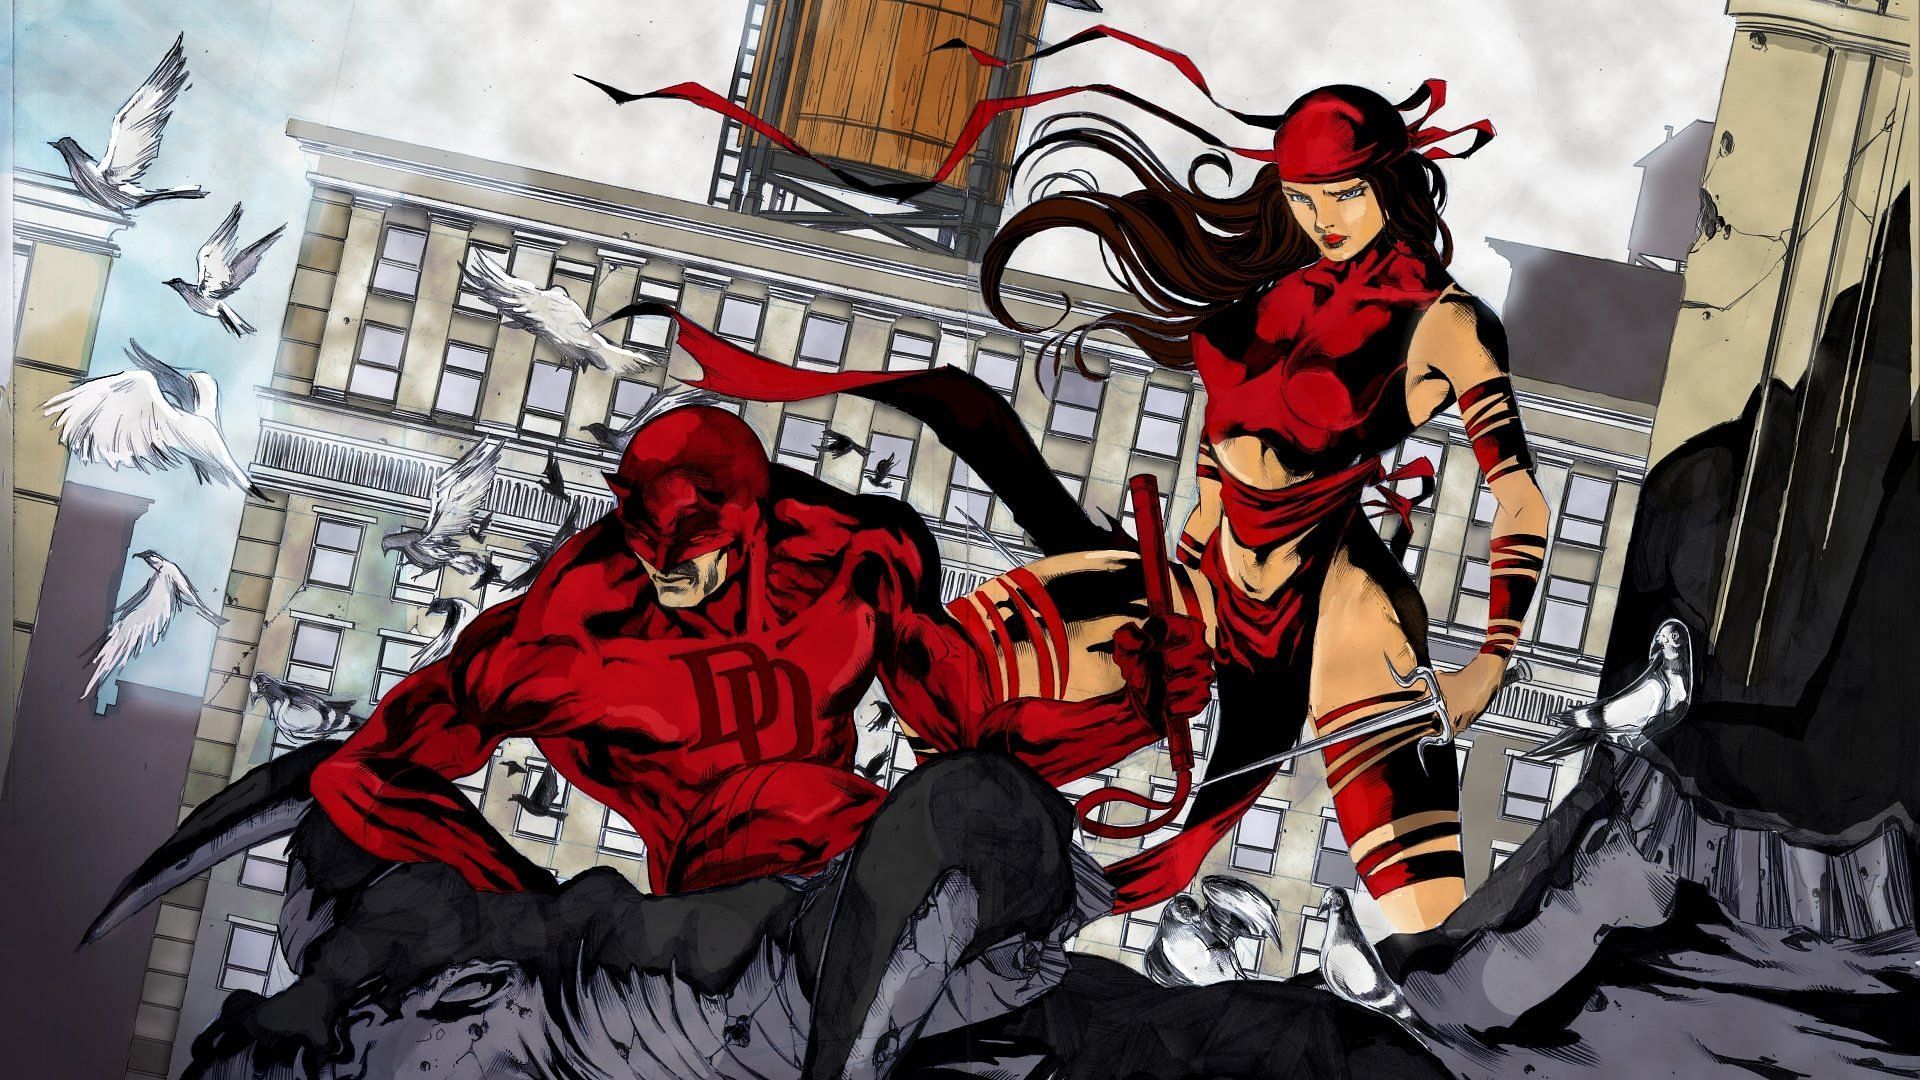 Elektra&#039;s death occurred in the 1986 storyline Daredevil #181, written by Frank Miller with art by Klaus Janson. (Image Via Marvel)